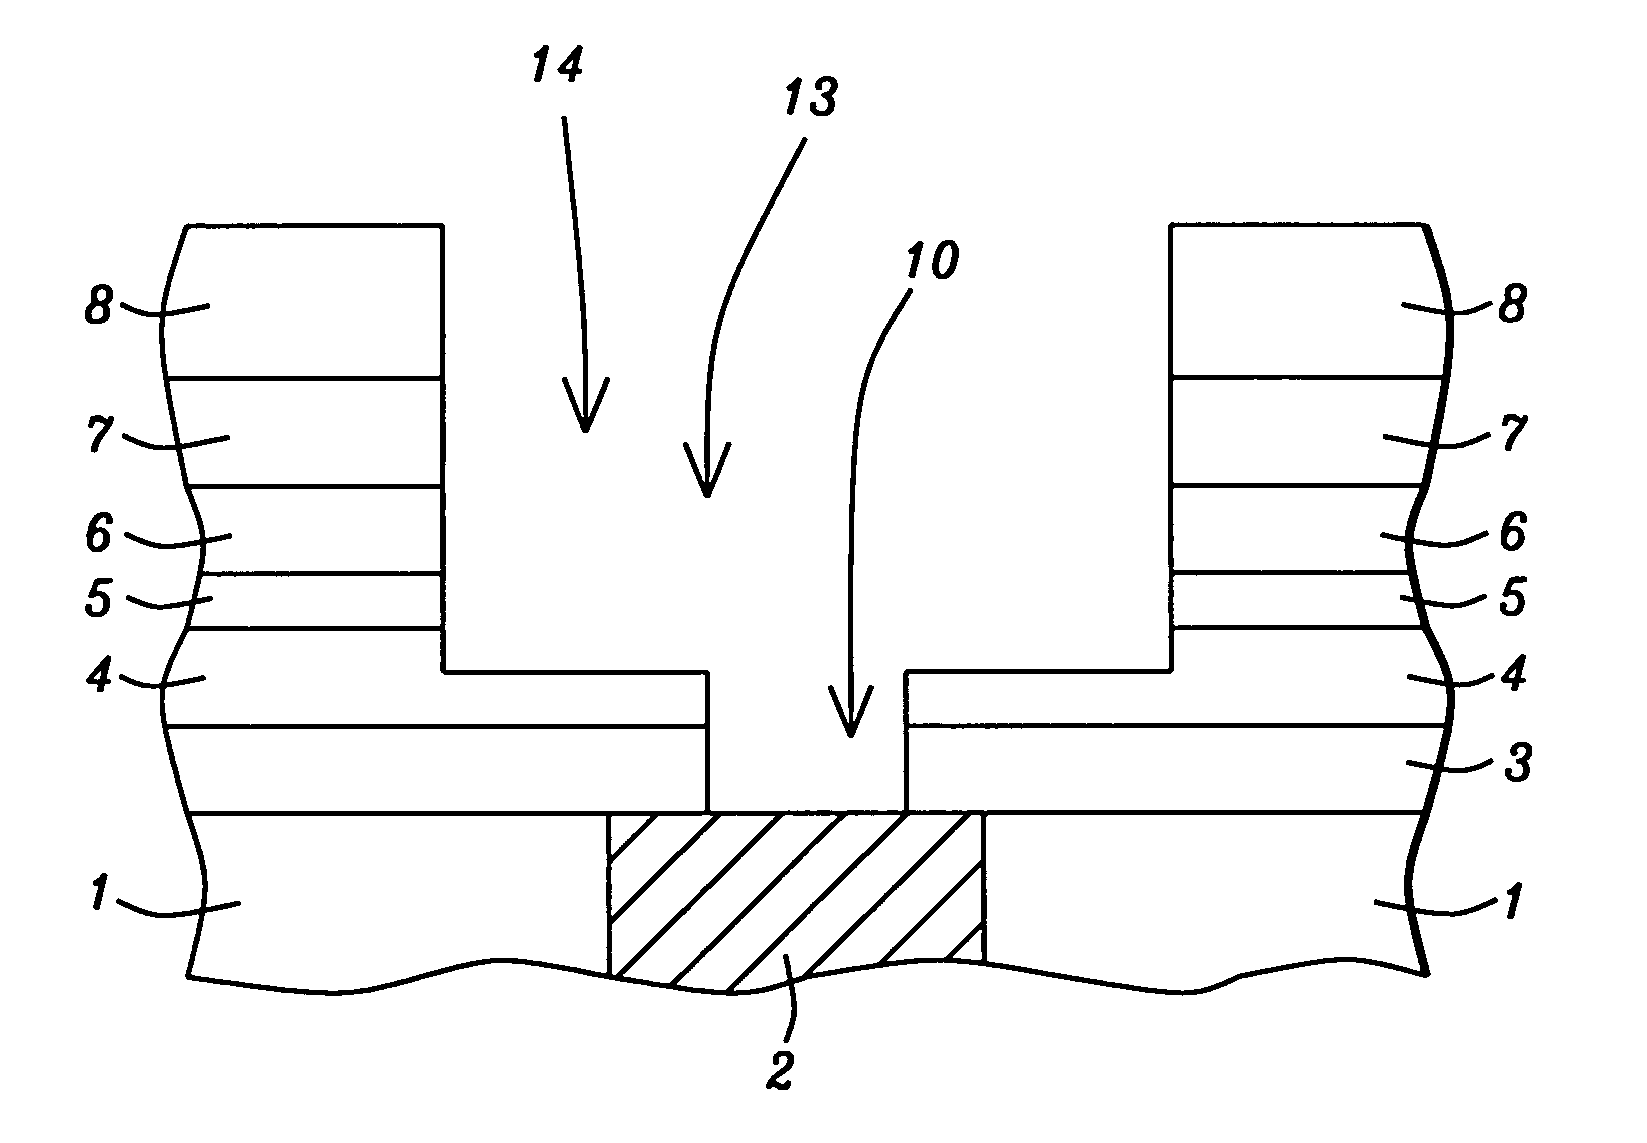 Two step trench definition procedure for formation of a dual damascene opening in a stack of insulator layers